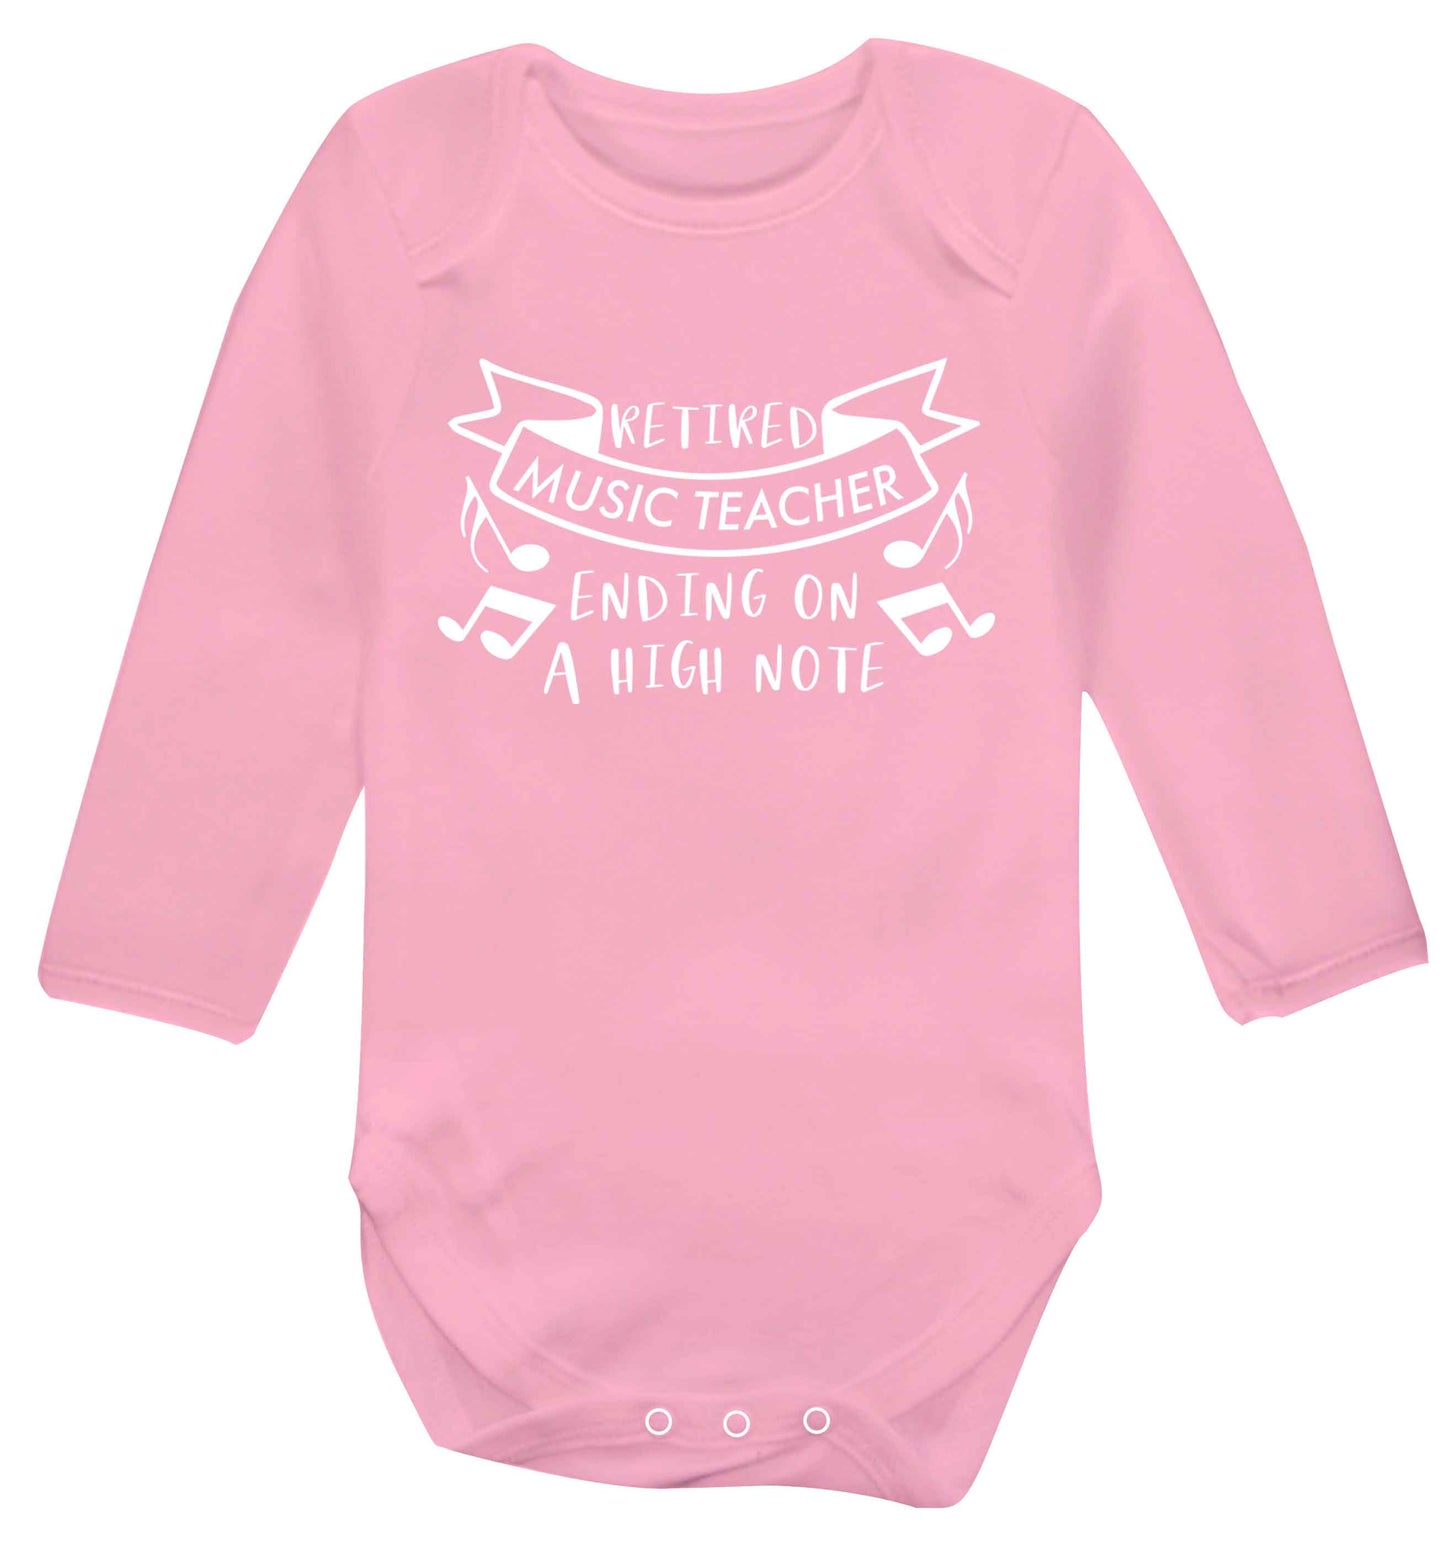 Retired music teacher ending on a high note Baby Vest long sleeved pale pink 6-12 months